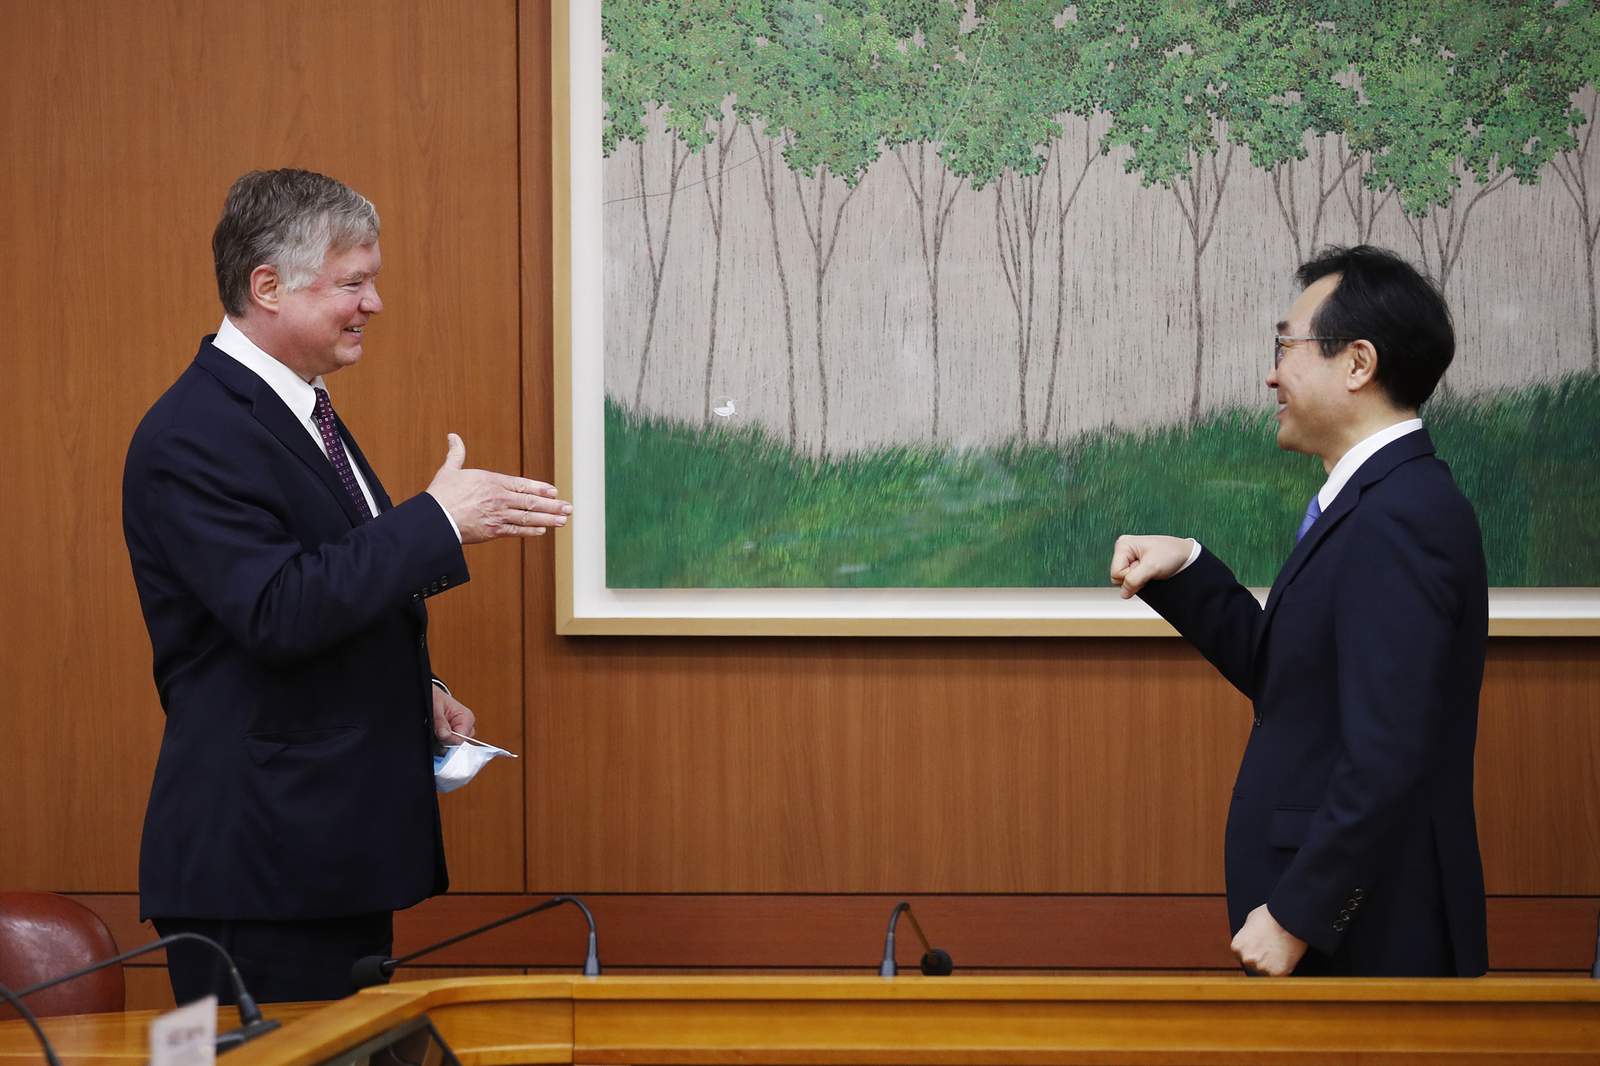 US envoy meets officials in Seoul as Kim honors grandfather